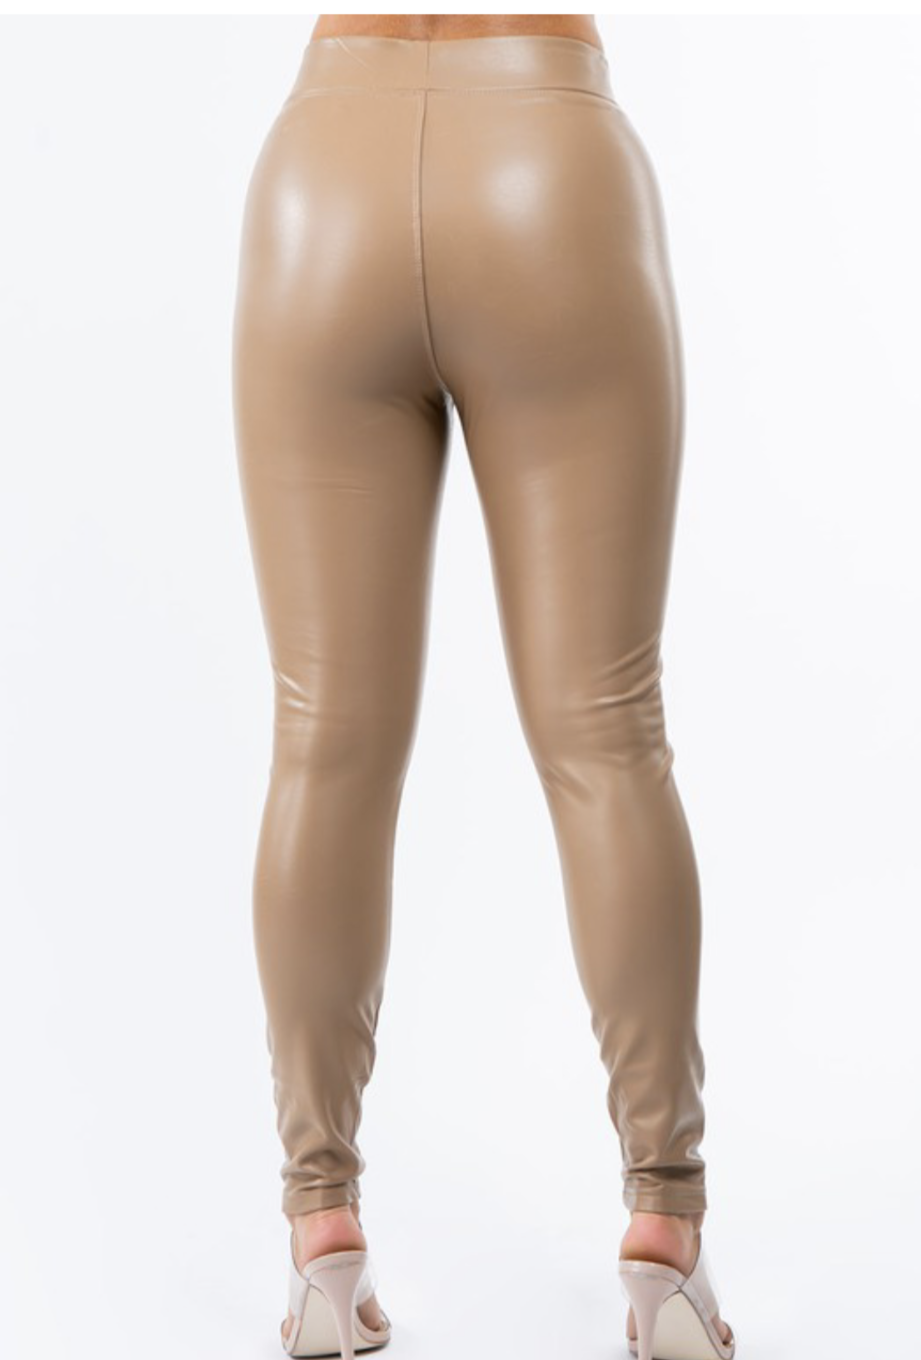 VAL CAPPUCCINO HIGH WAISTED LEATHER LEGGINGS - Samunsboutique